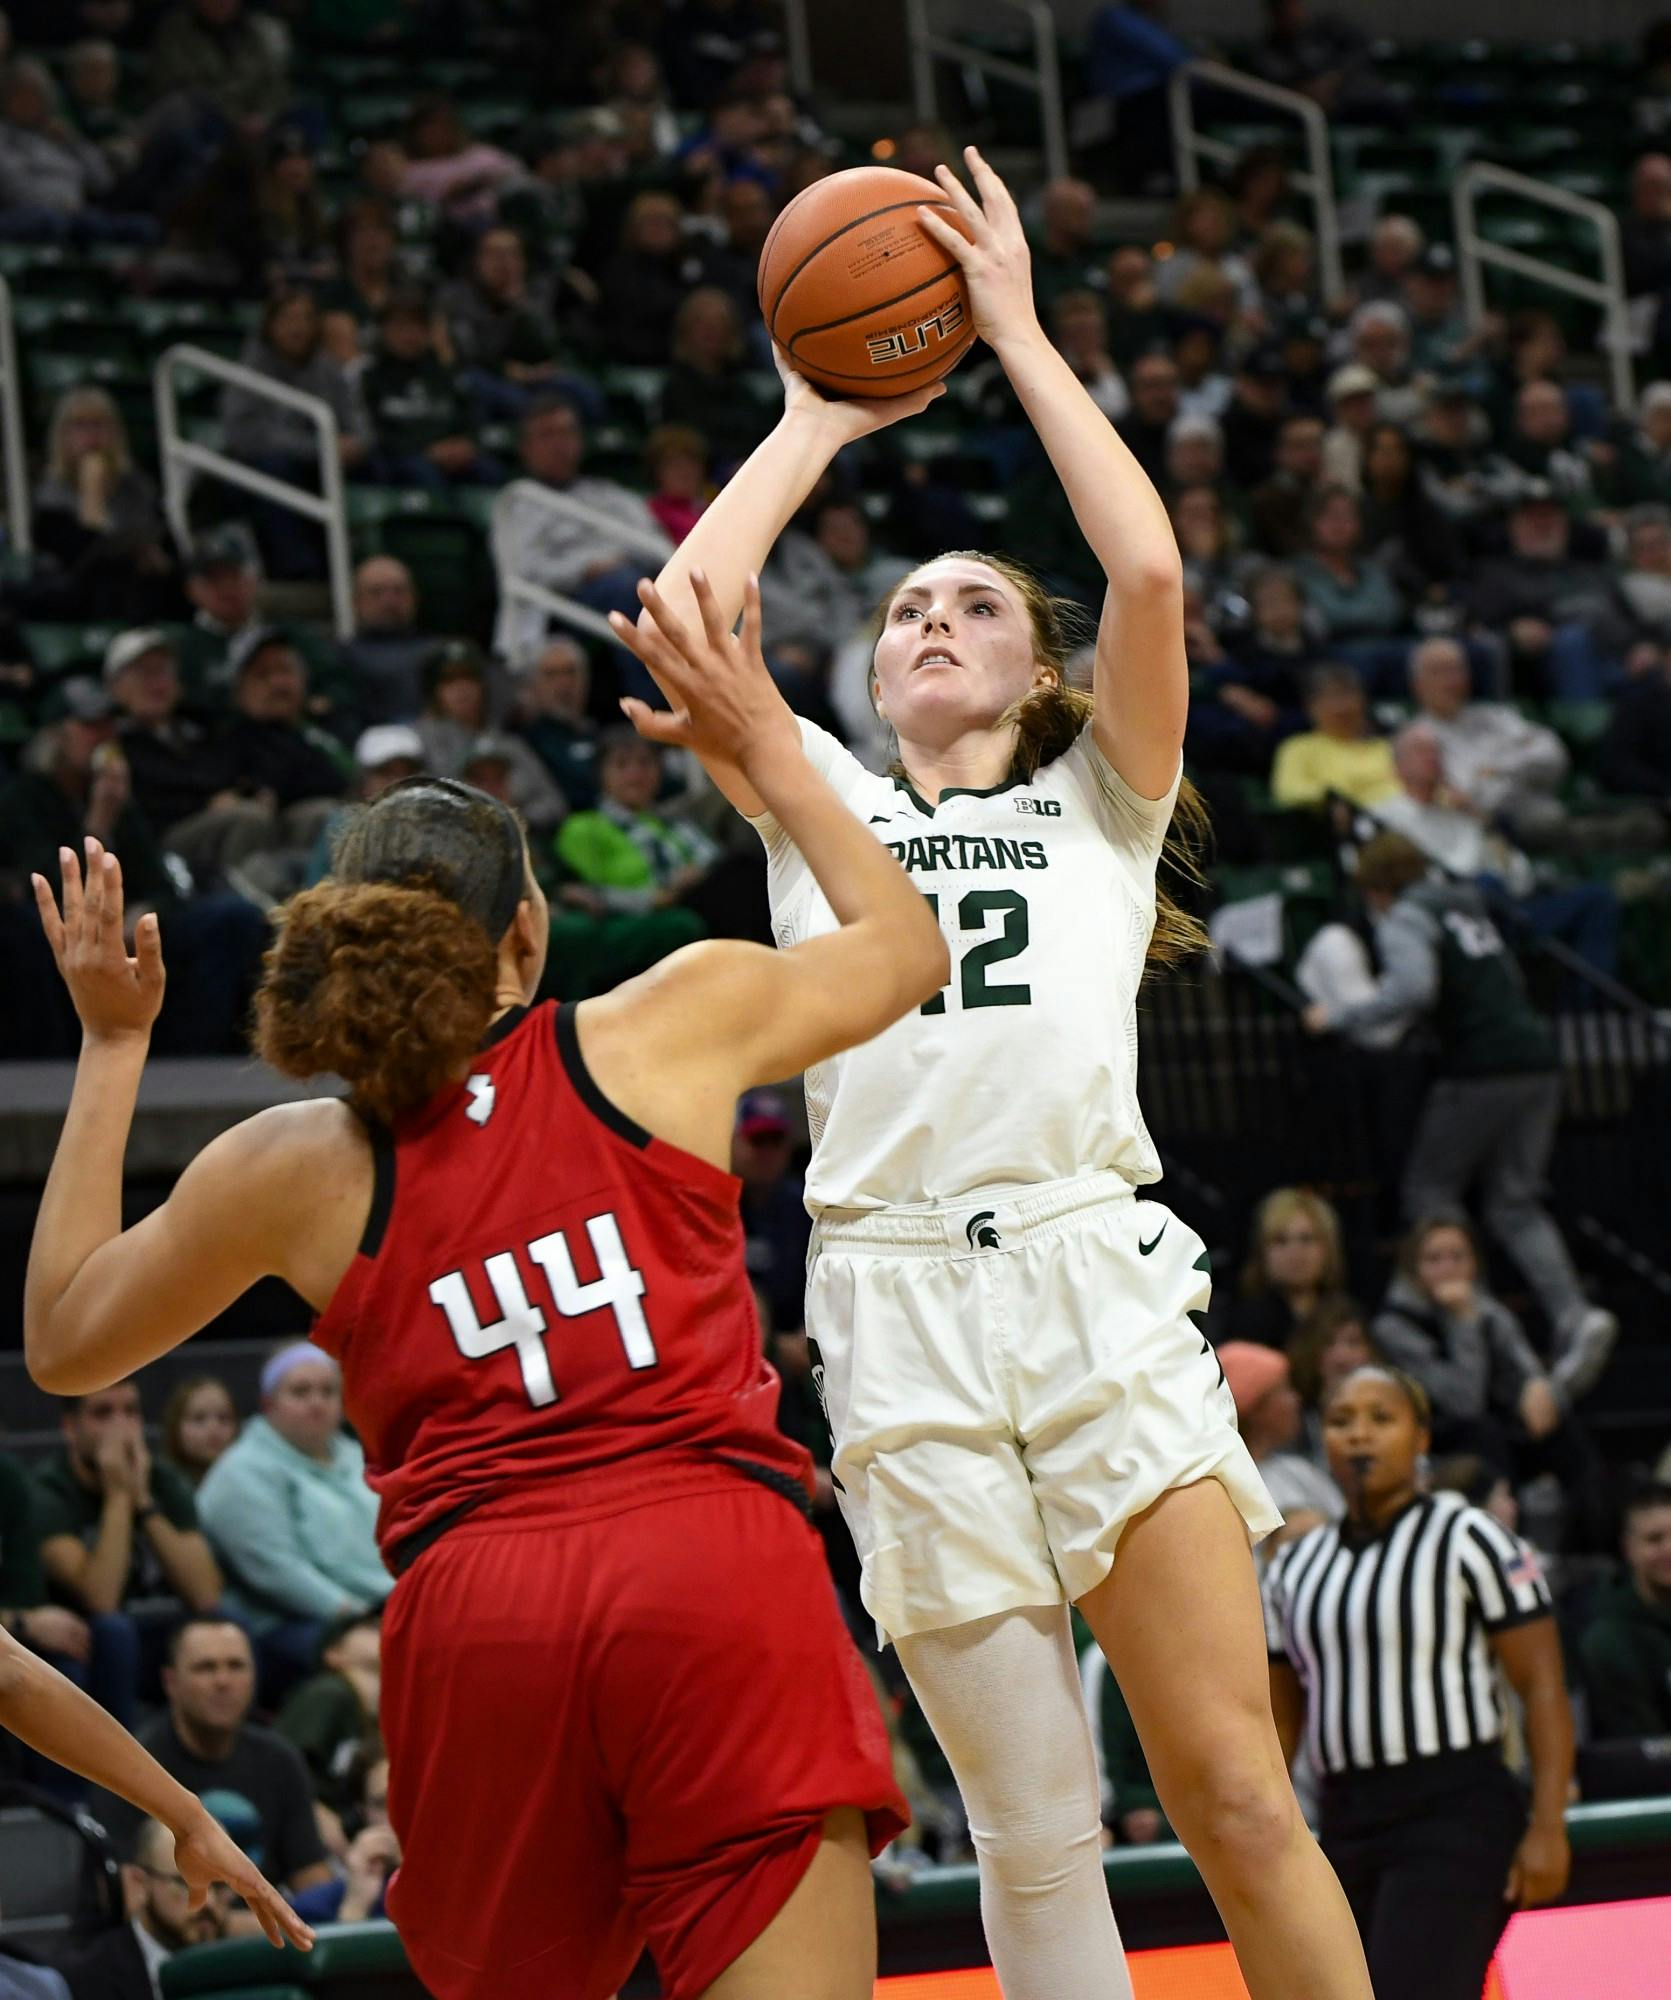 <p>Sophomore forward Kayla Belles (42) shoots over a defender during the women&#x27;s basketball game against Rutgers at the Breslin Center on Feb. 13, 2020. The Spartans ended a five game losing streak and defeated the Scarlet Knights, 57-53. </p>